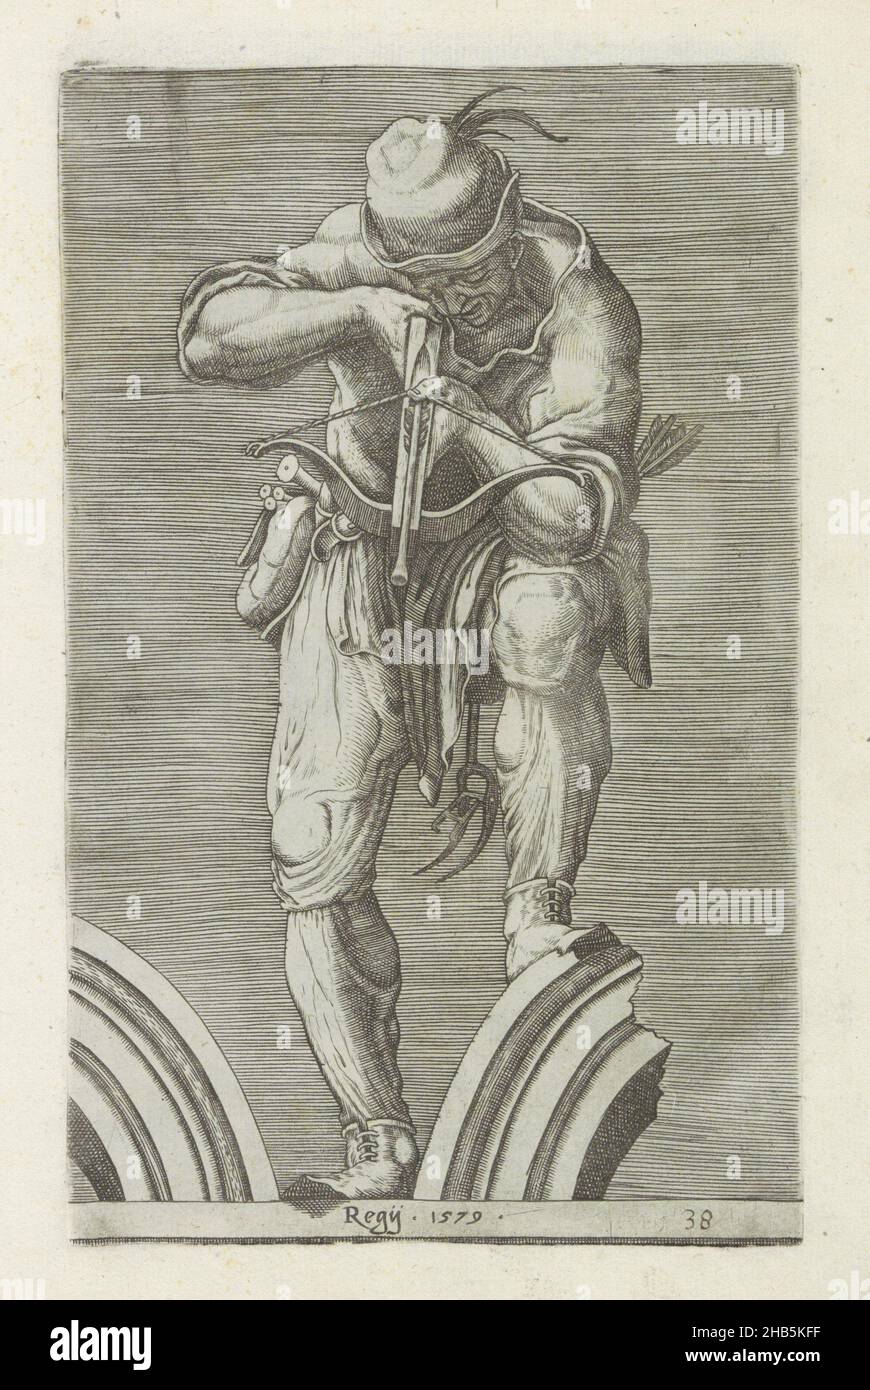 Hunter with a crossbow, Antique sculptures in Rome (series title), Antiquarum statuarum urbis Romae quae in publicis locis visuntur icones (series title), Print is part of an album., print maker: anonymous, publisher: Andrea Vaccari, print maker: Italy, publisher: Rome, 1579 and/or 1584, paper, engraving, height 222 mm × width 141 mm Stock Photo